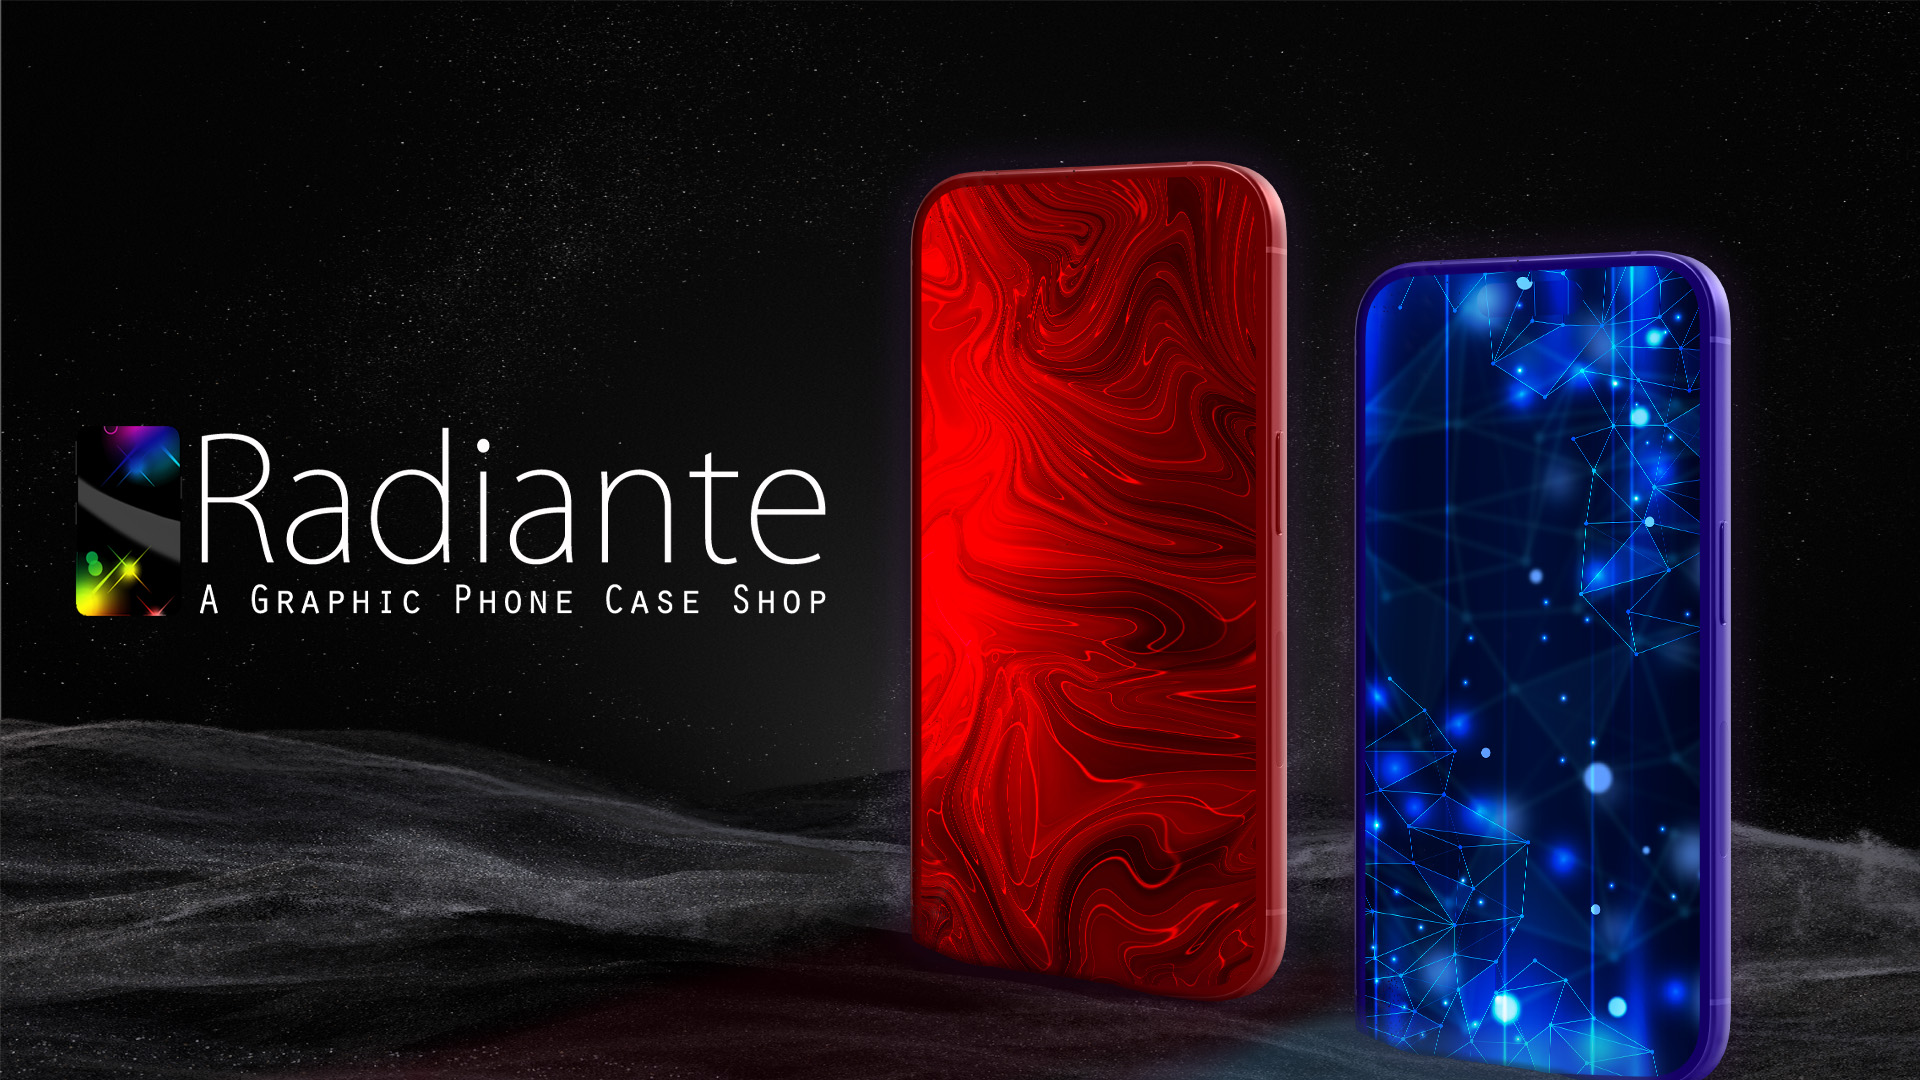 Large, beautiful, red and blue Radiante phone cases and designs.